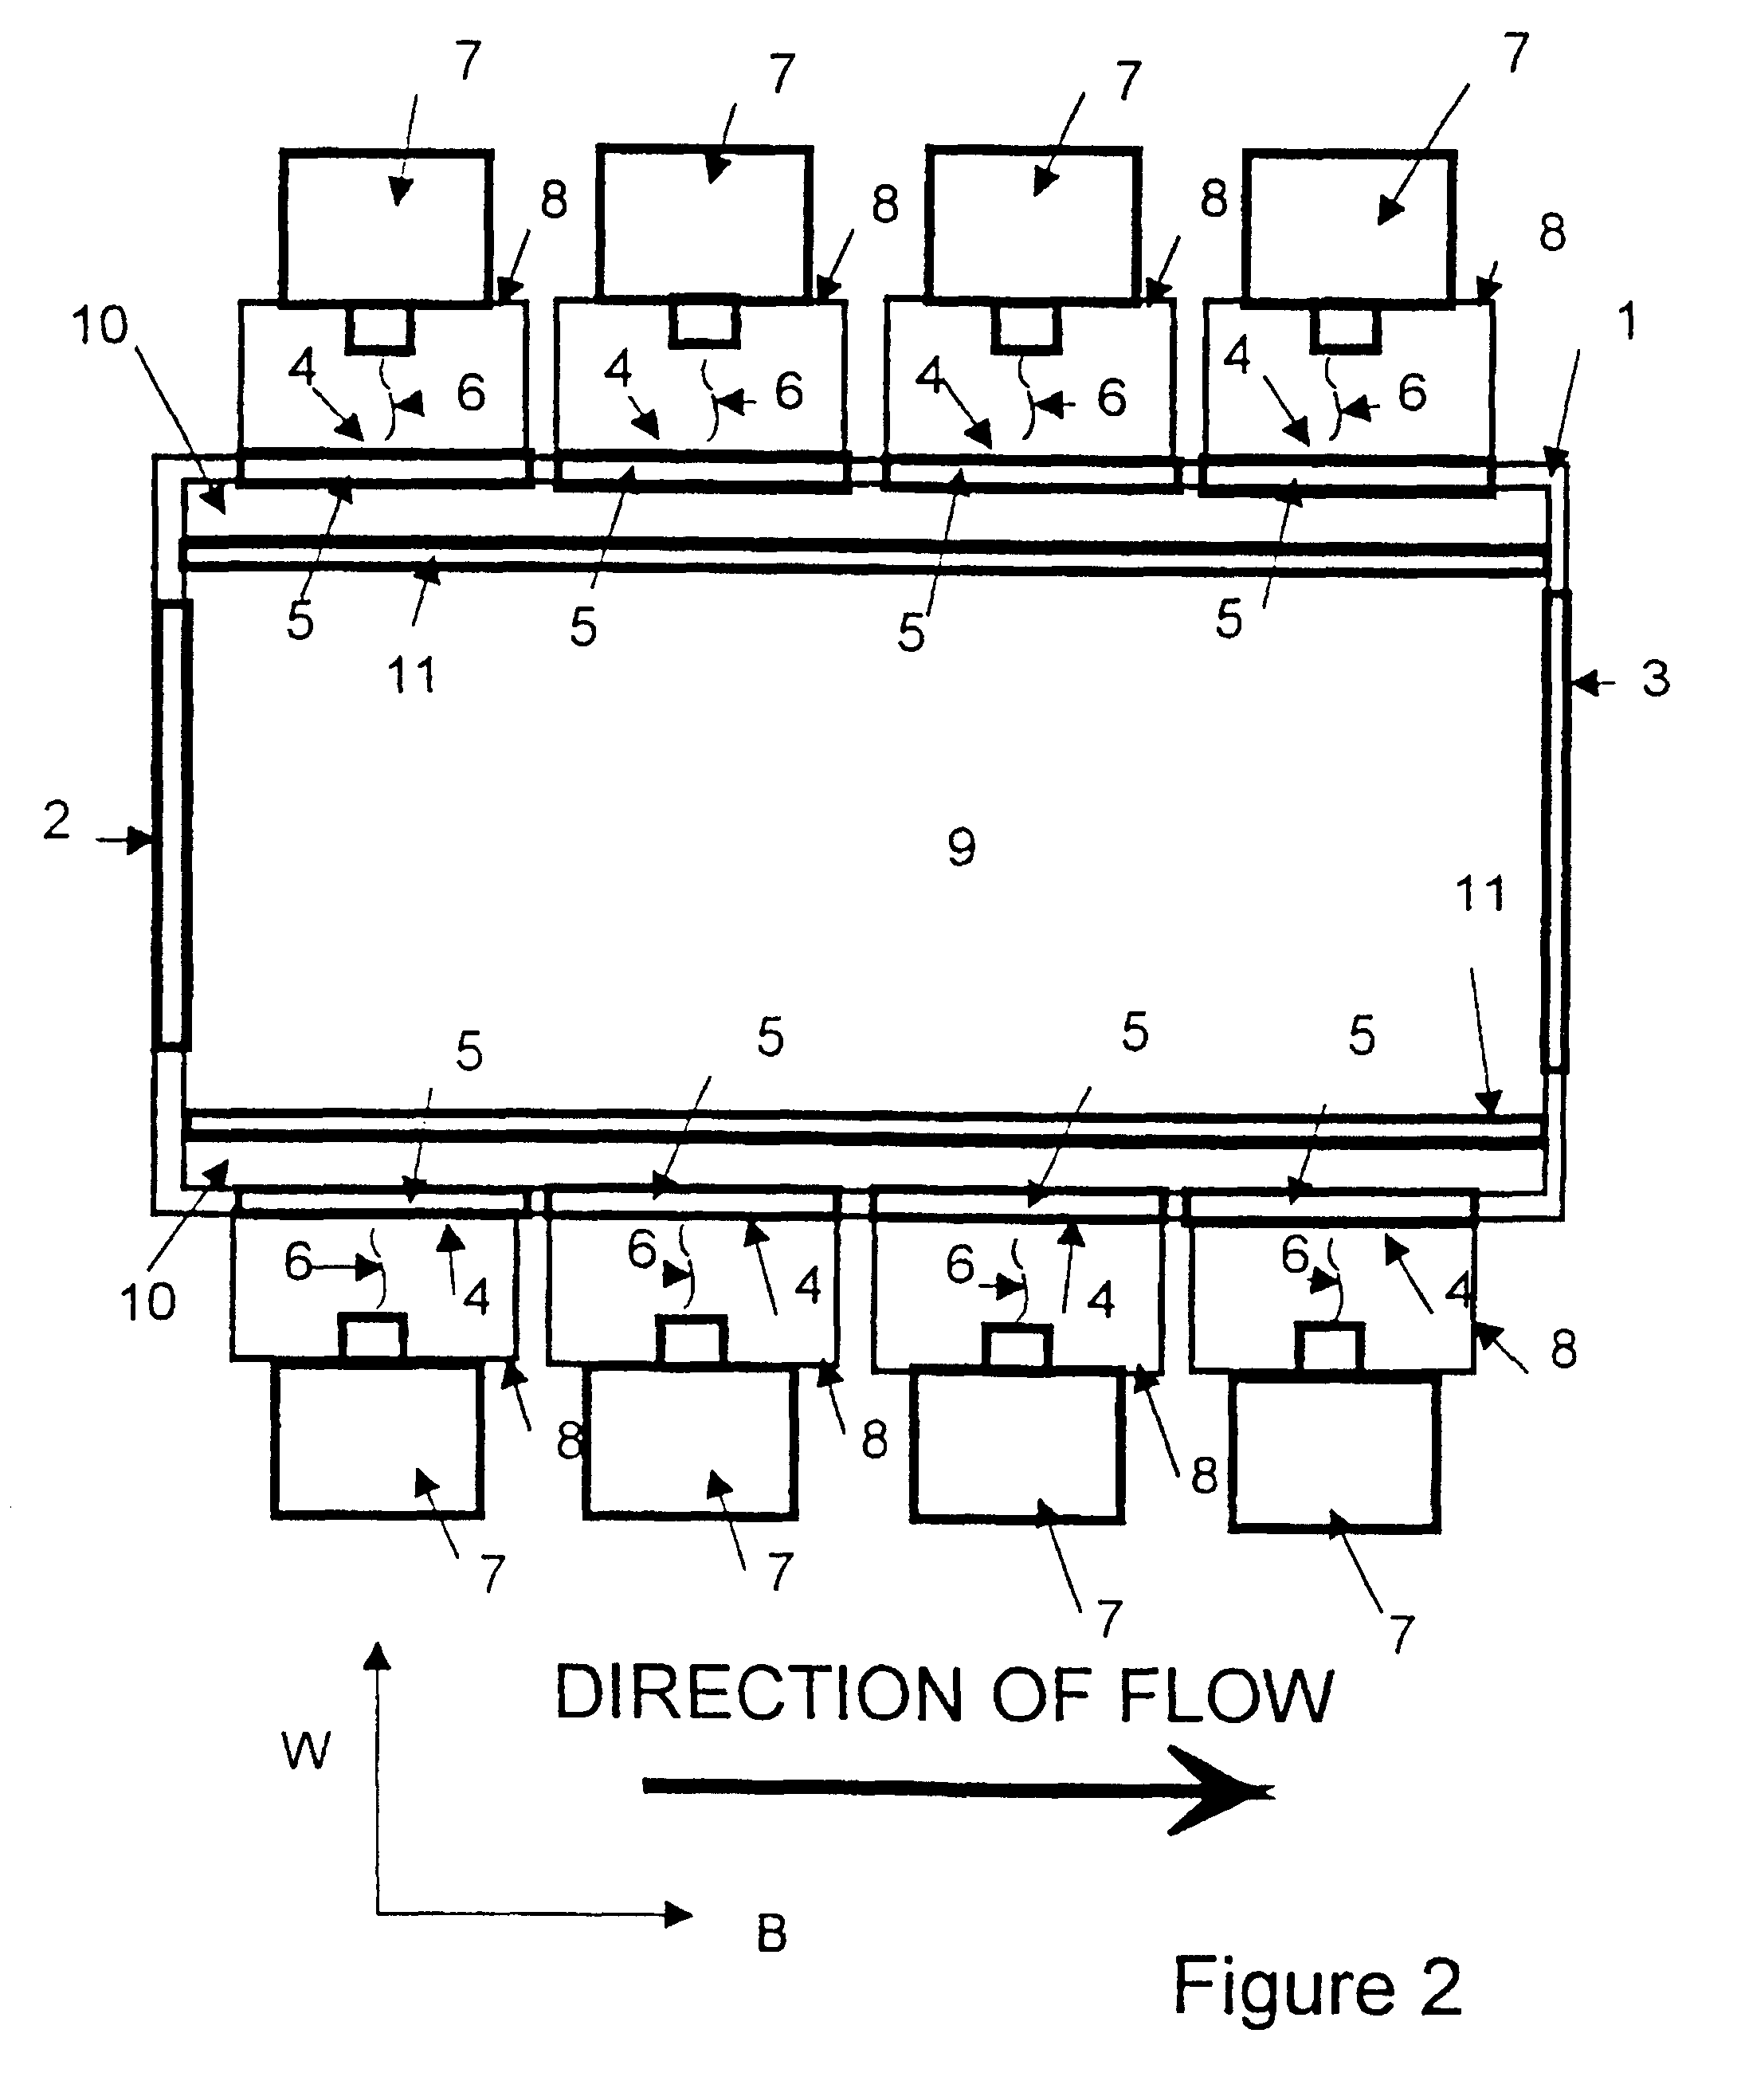 Artificial dielectric device for heating gases with electromagnetic energy